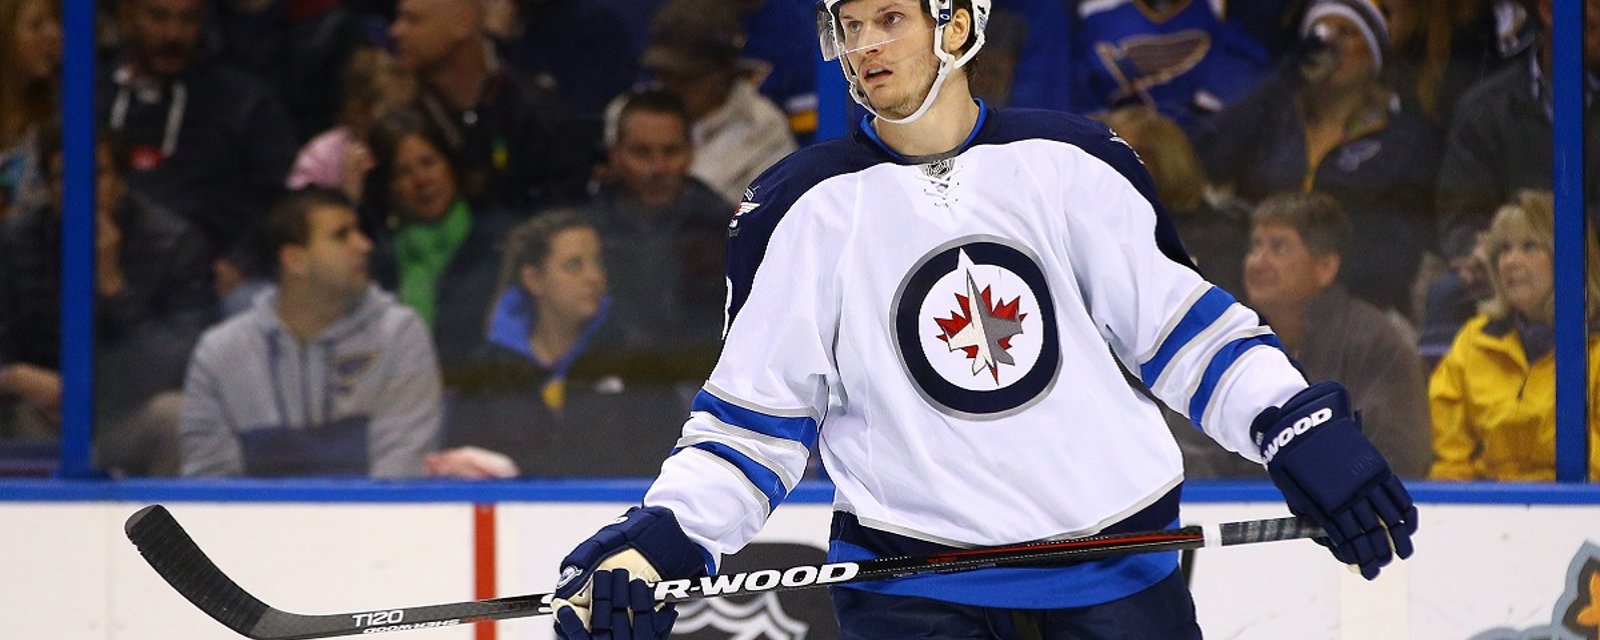 Jets fans hilariously mock Jacob Trouba after his trade demands.